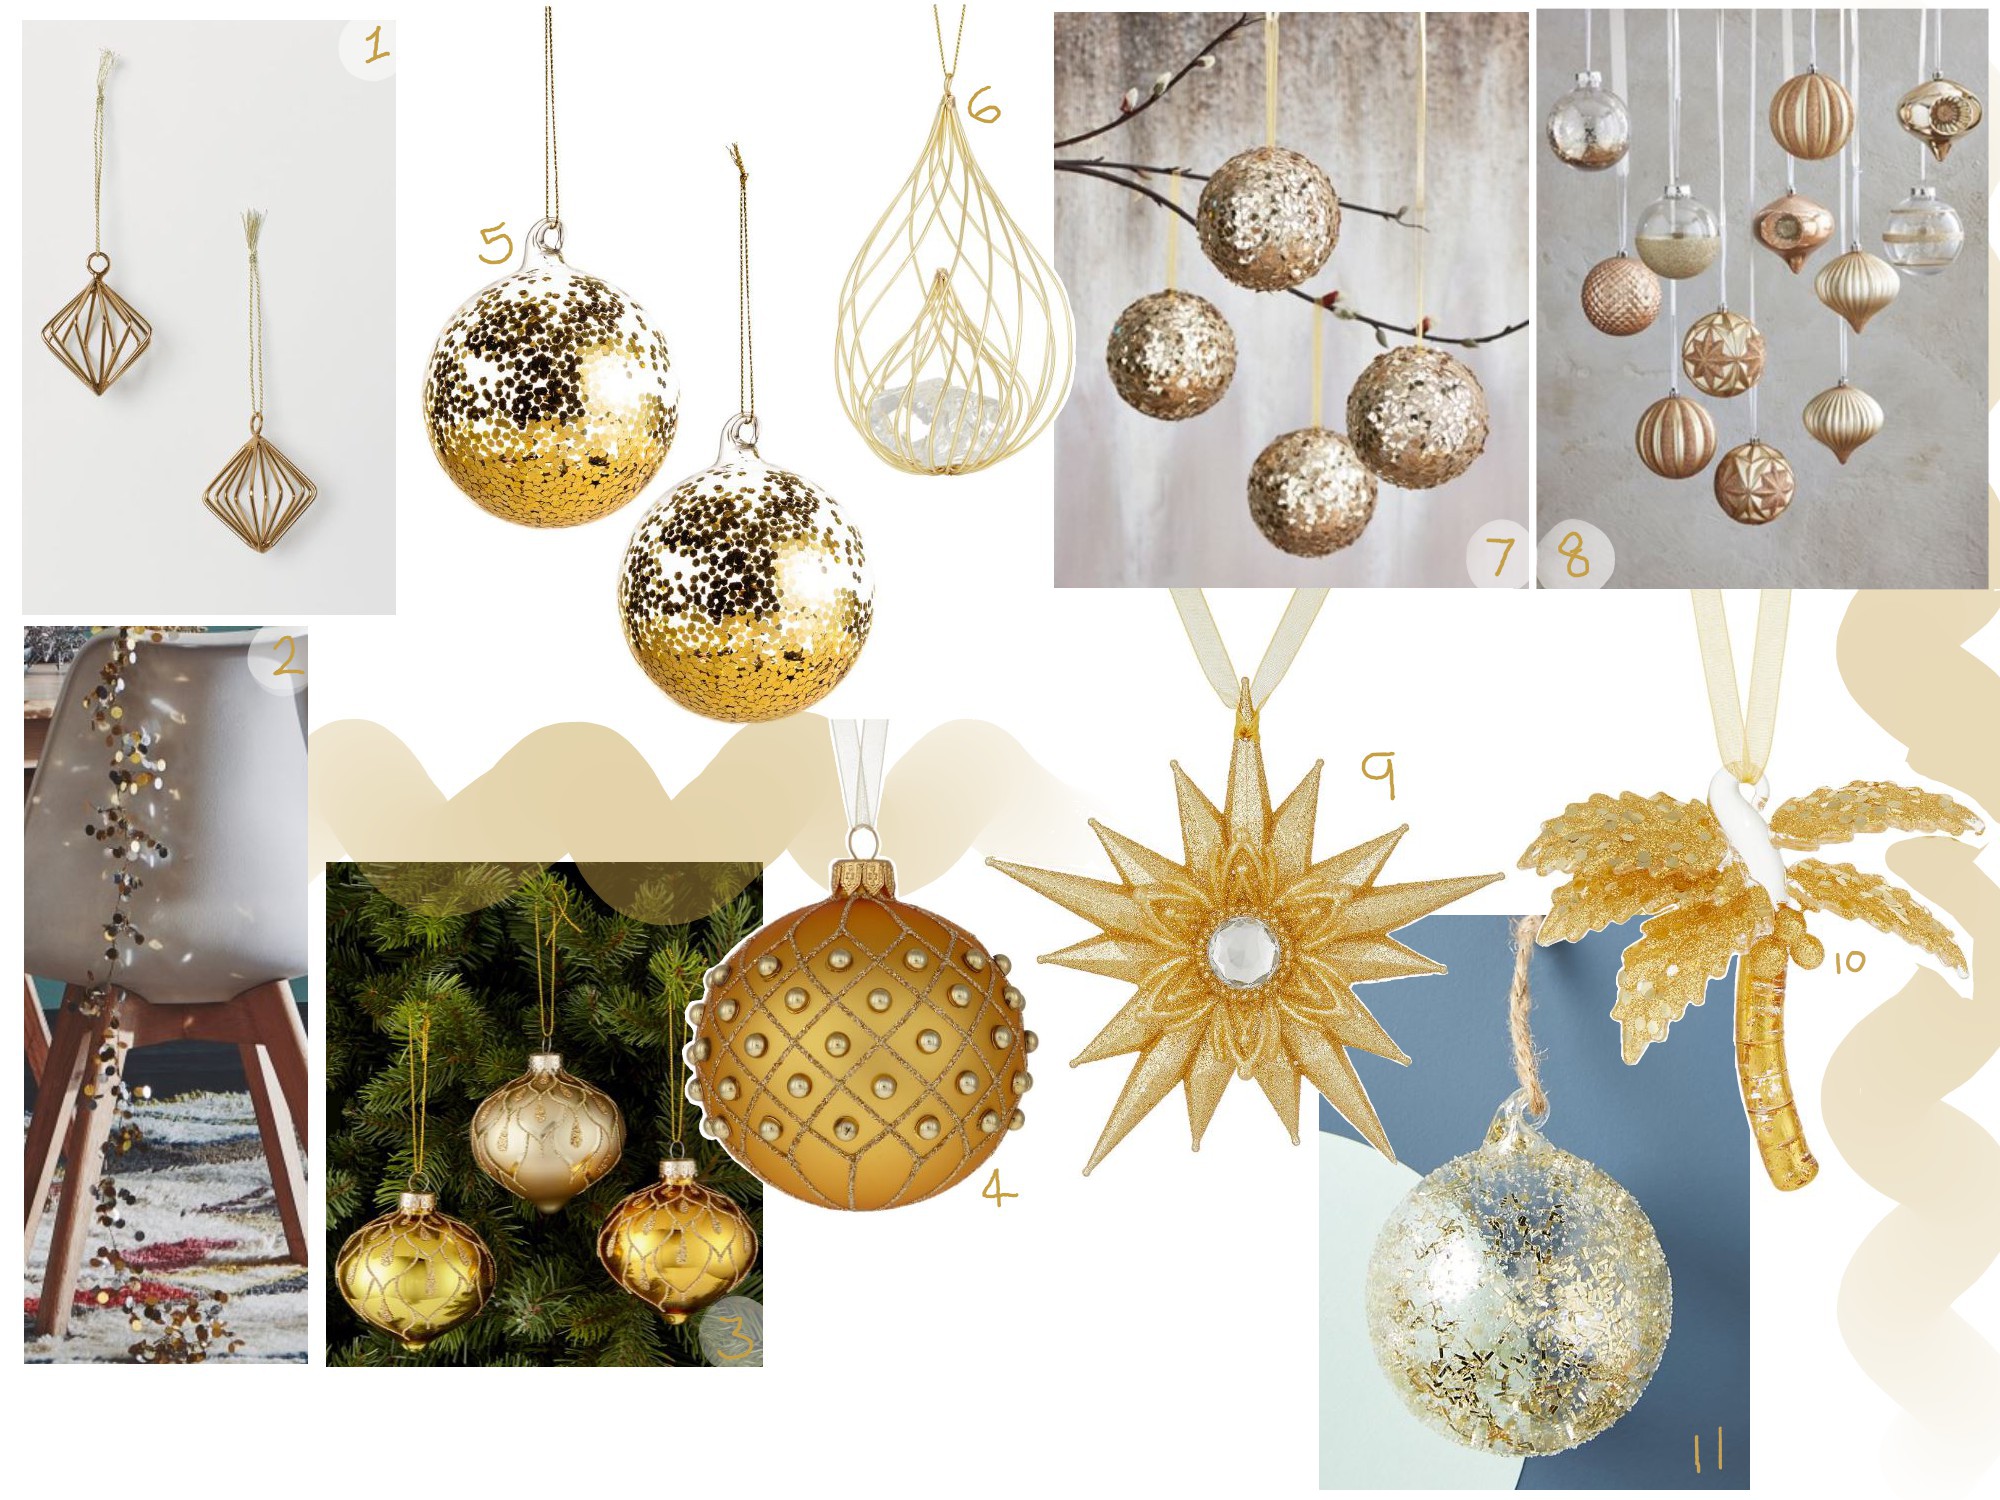 https://talilifestyle.com/2018/12/01/christmas-decoration-trends-2018/